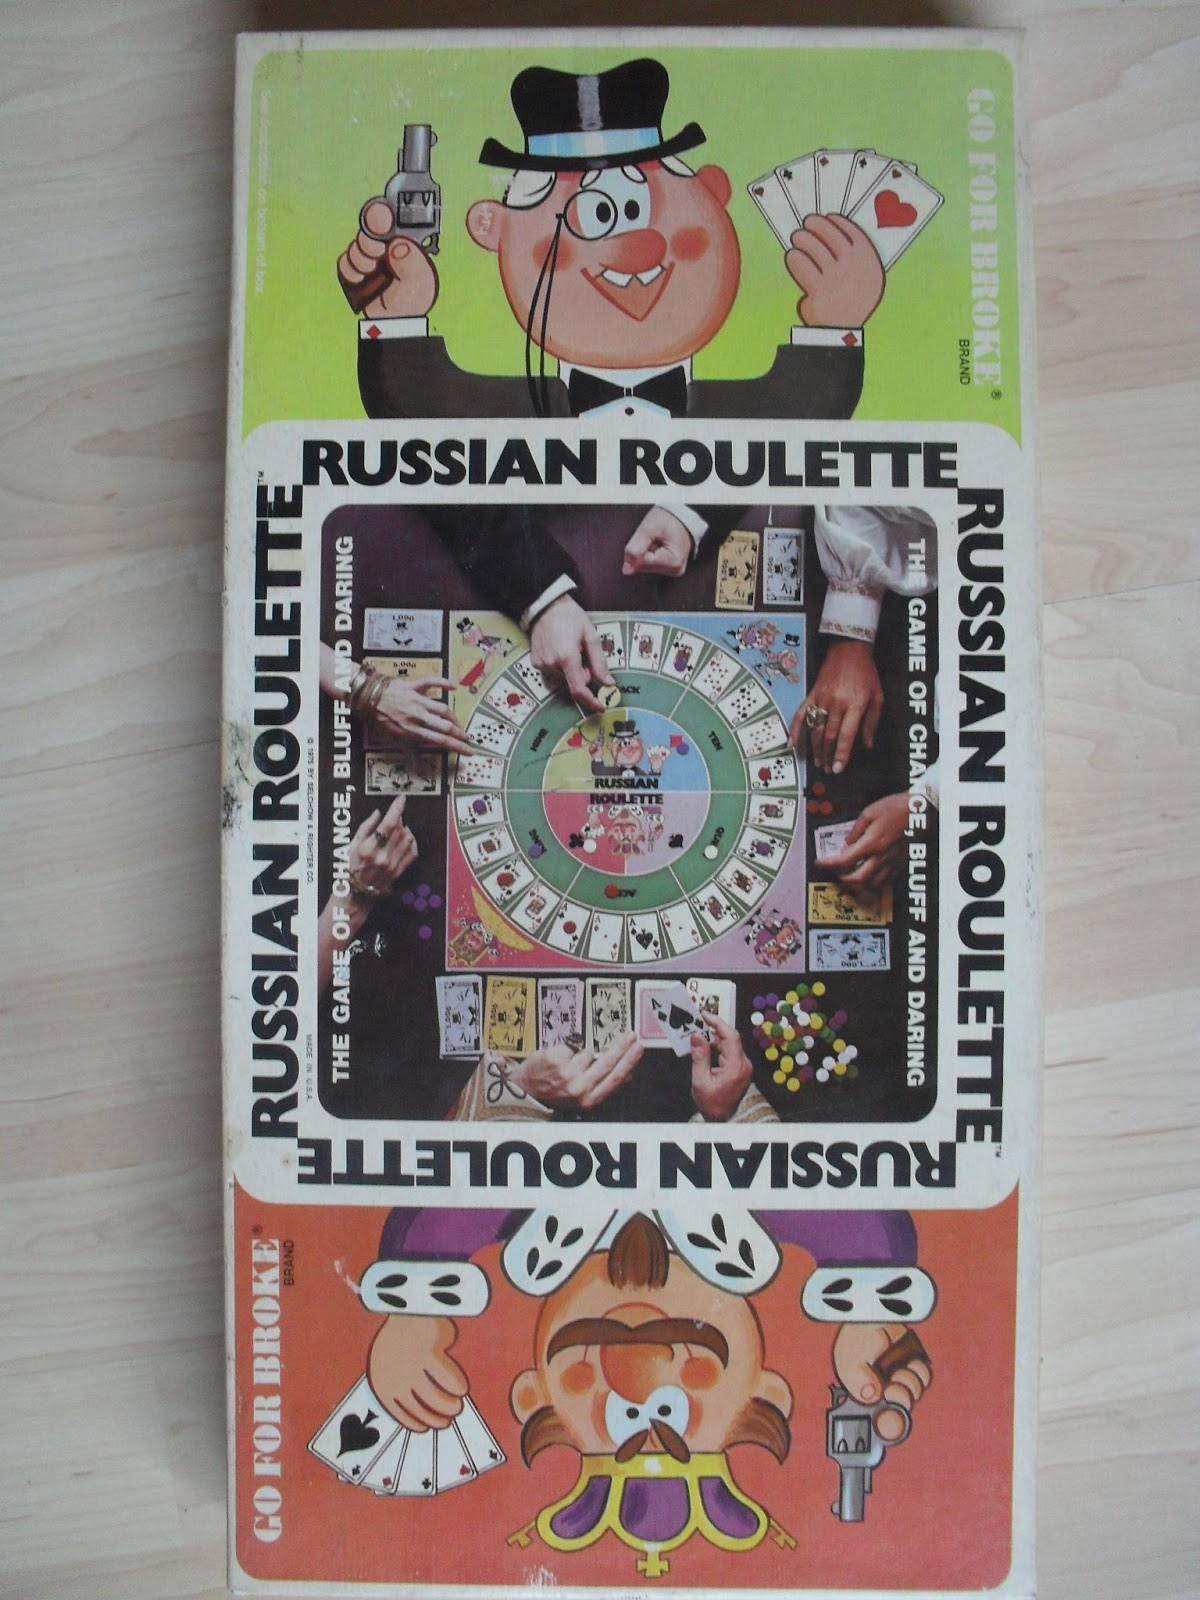 Vintage Russian Roulette Go for Broke Game 1975 Edition by 